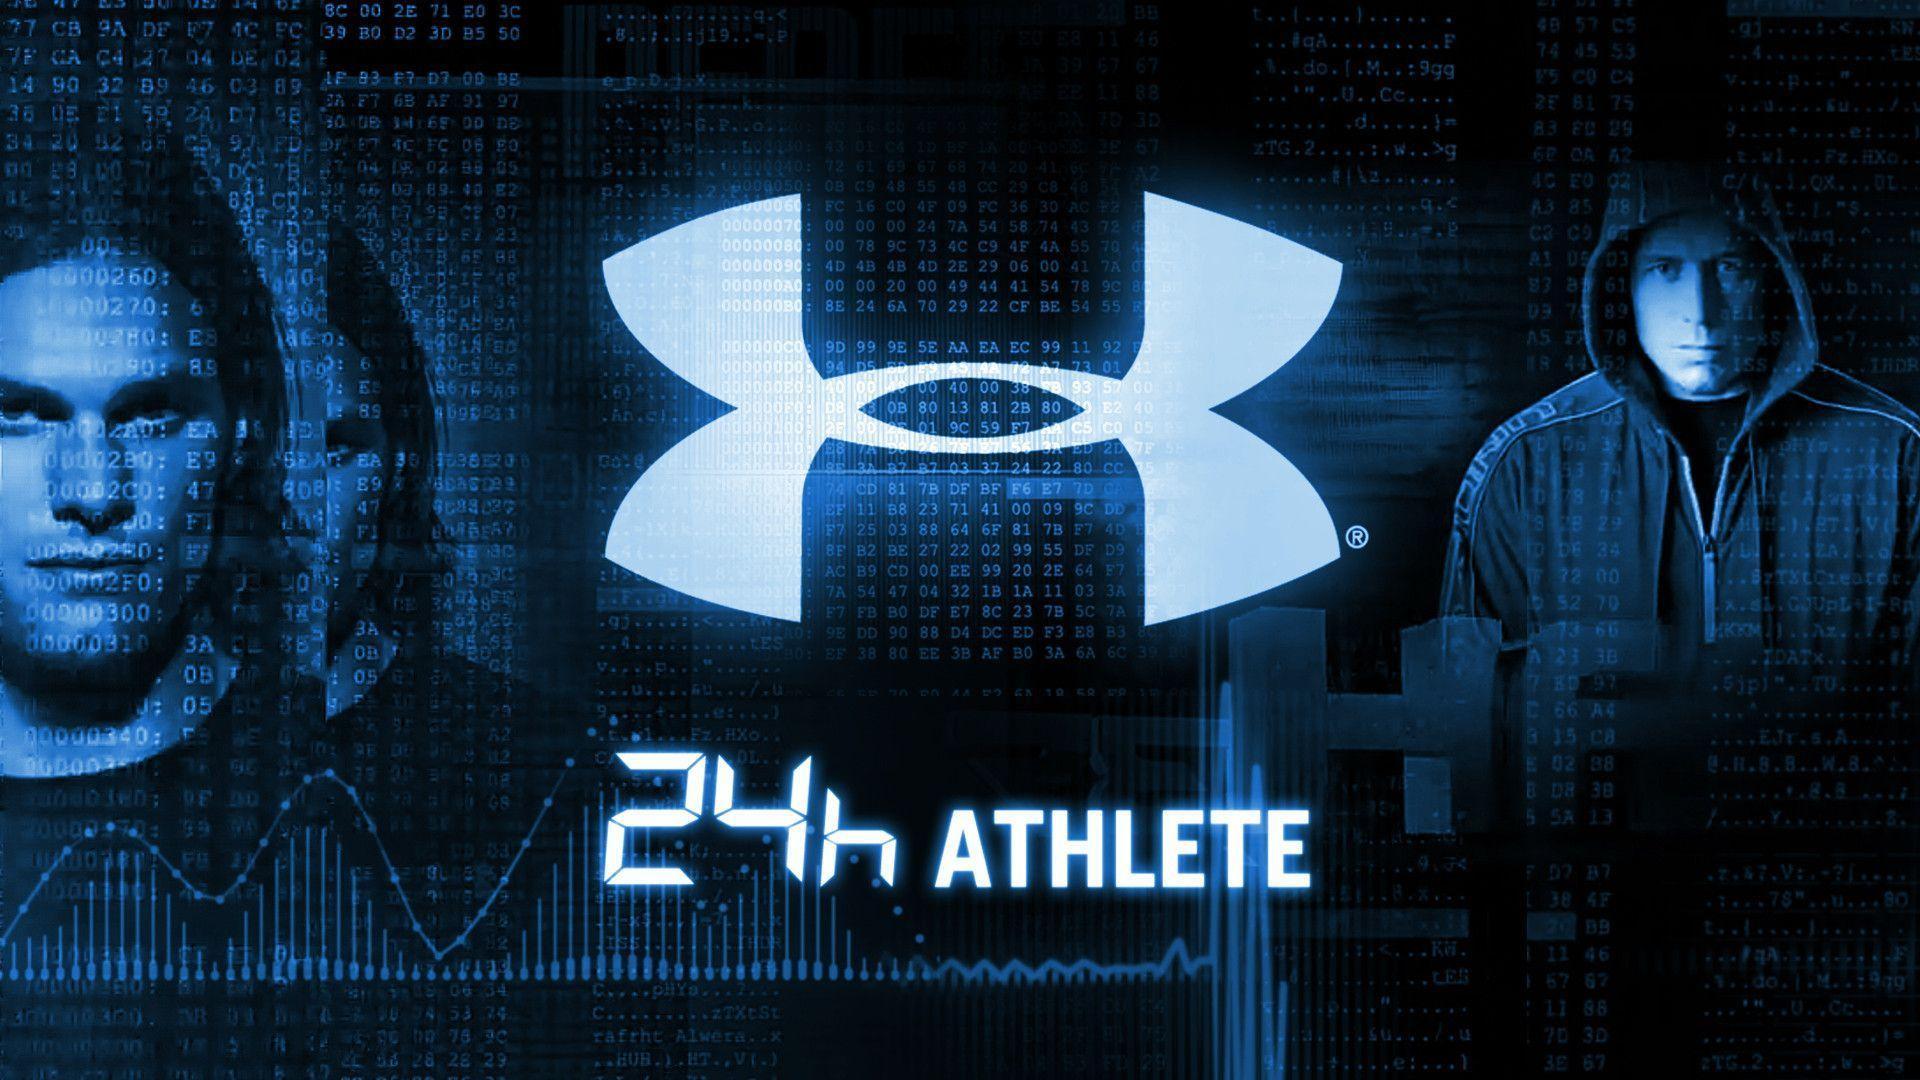 Cool Under Armour Wallpapers